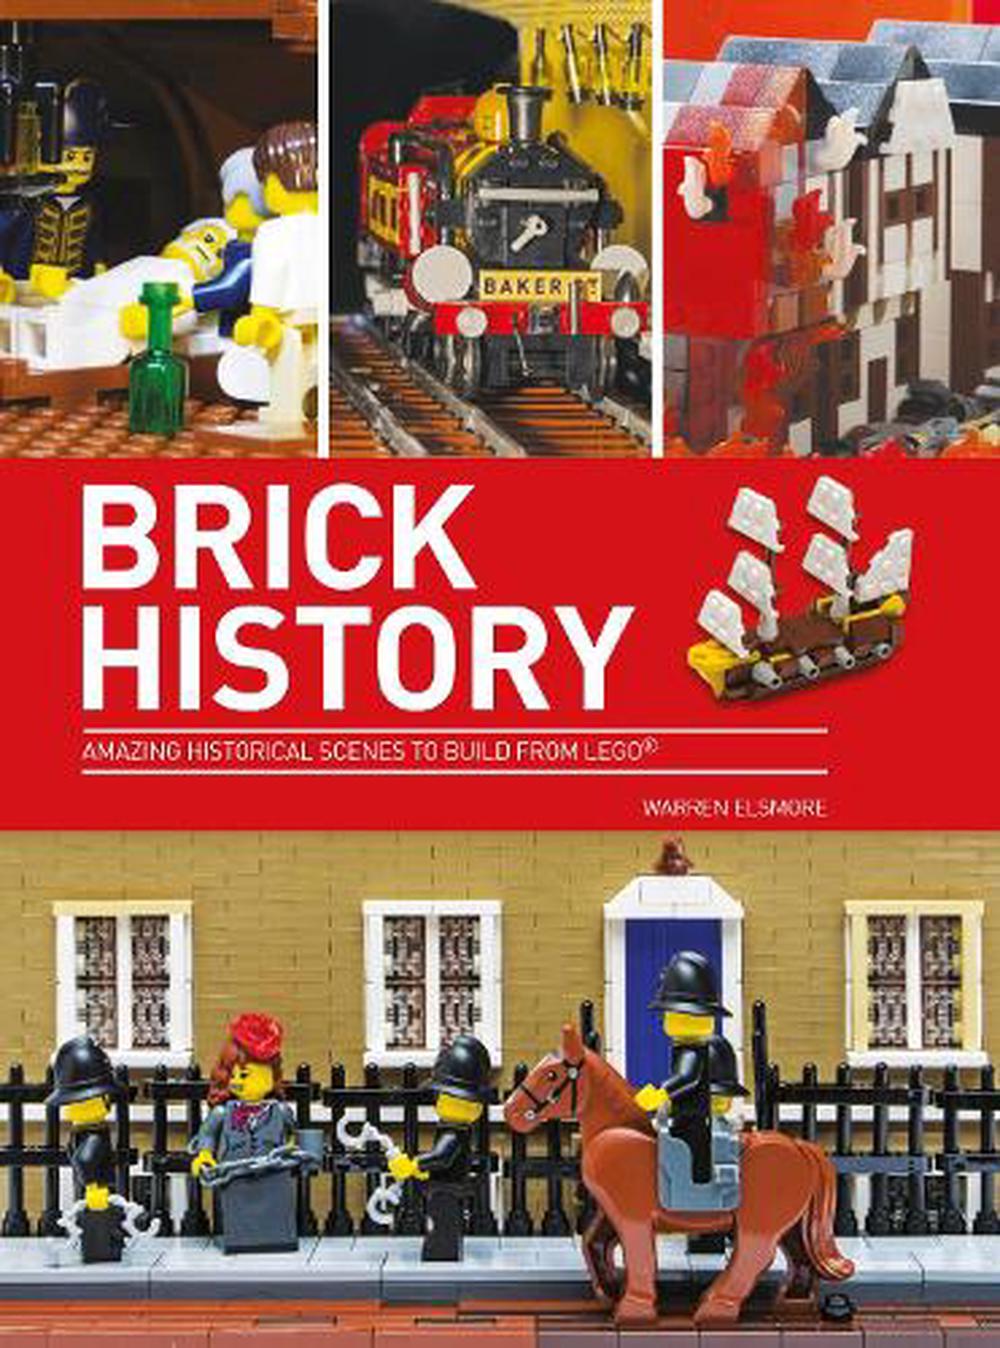 Elsmore,　Nile　Buy　History　9780750967570　by　at　Warren　Brick　online　Paperback,　The